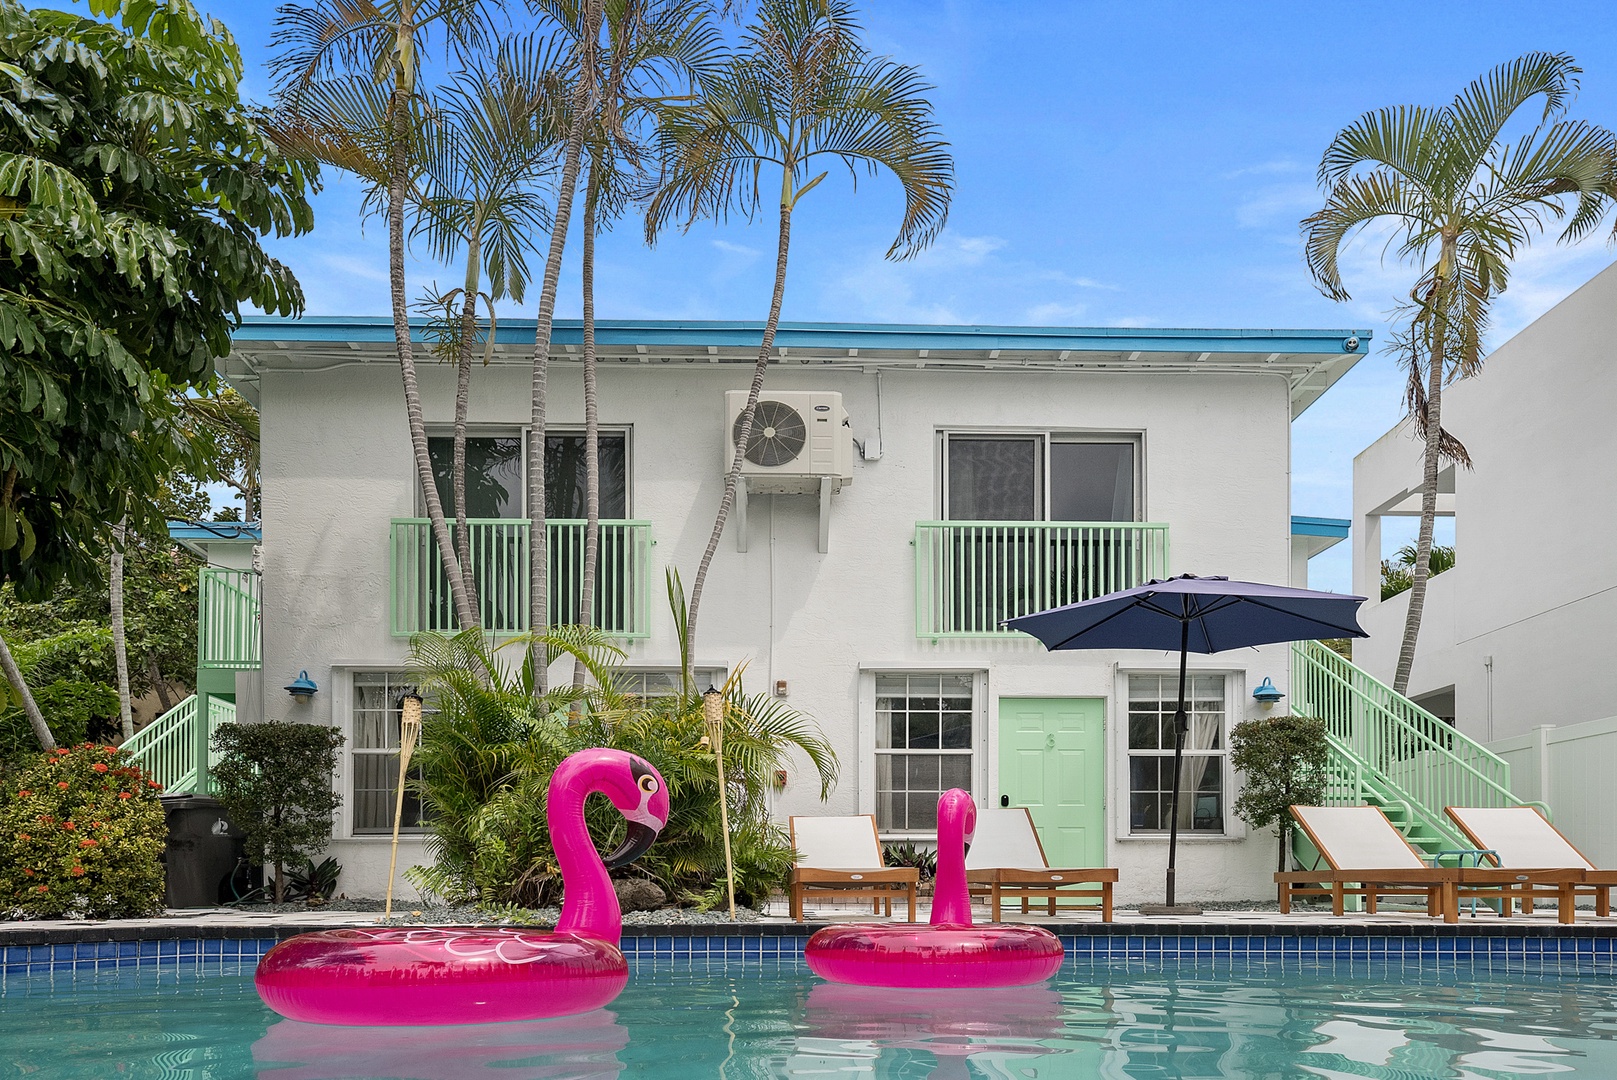 where to stay in Fort Lauderdale